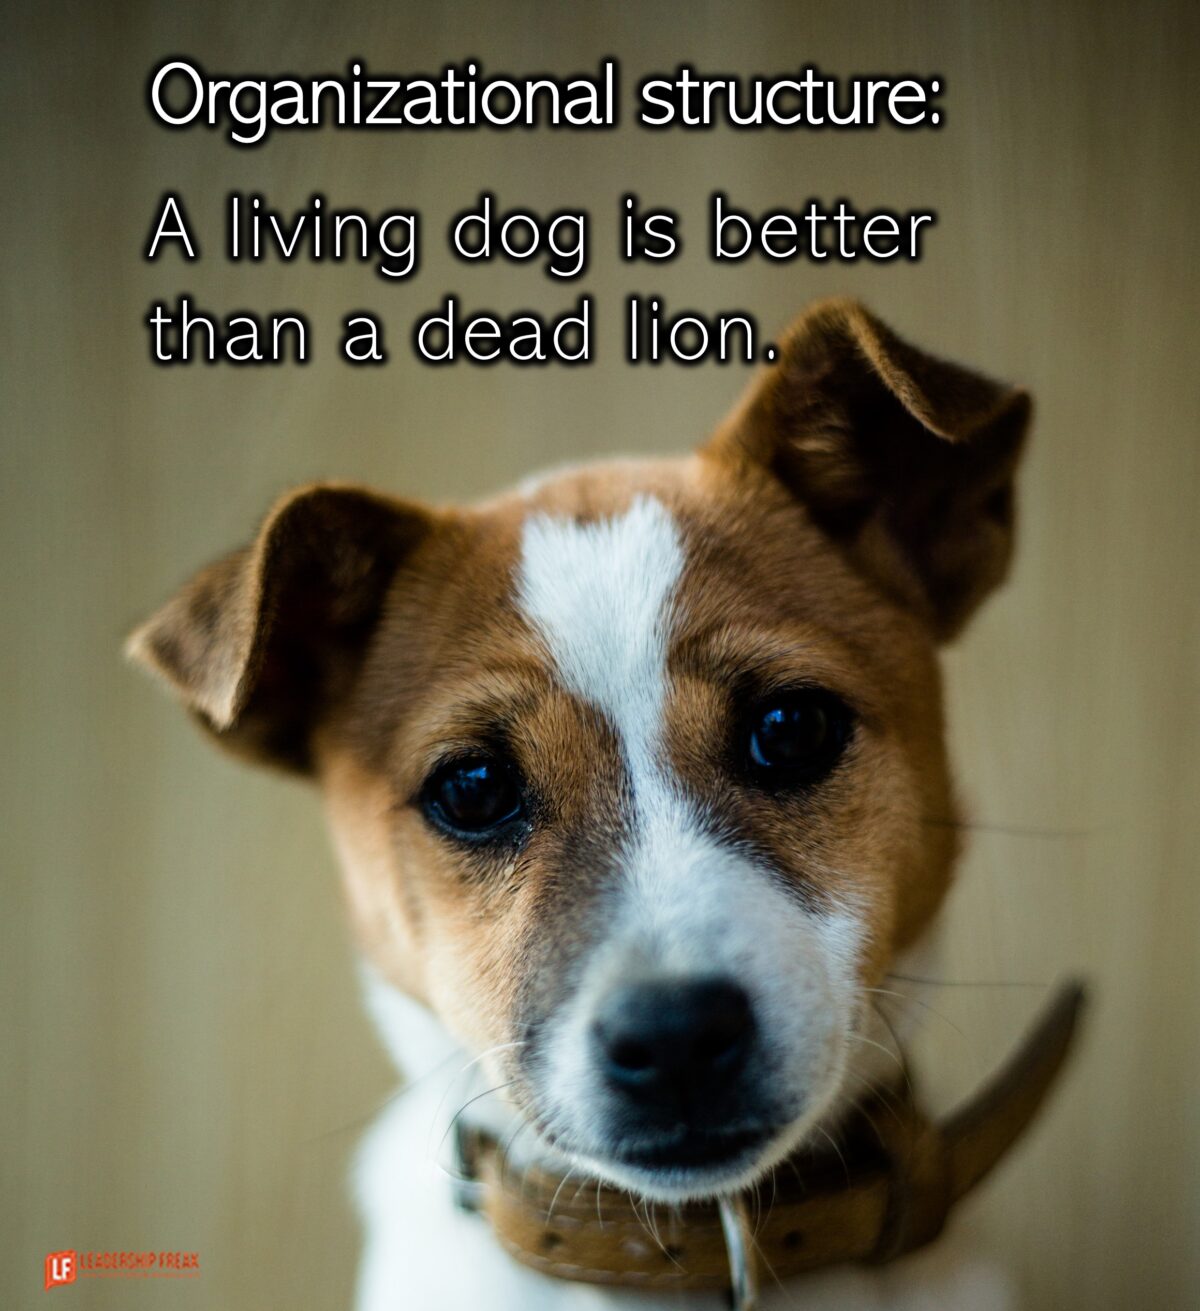 Organizational Structure: A Living Dog is Better than a Dead Lion